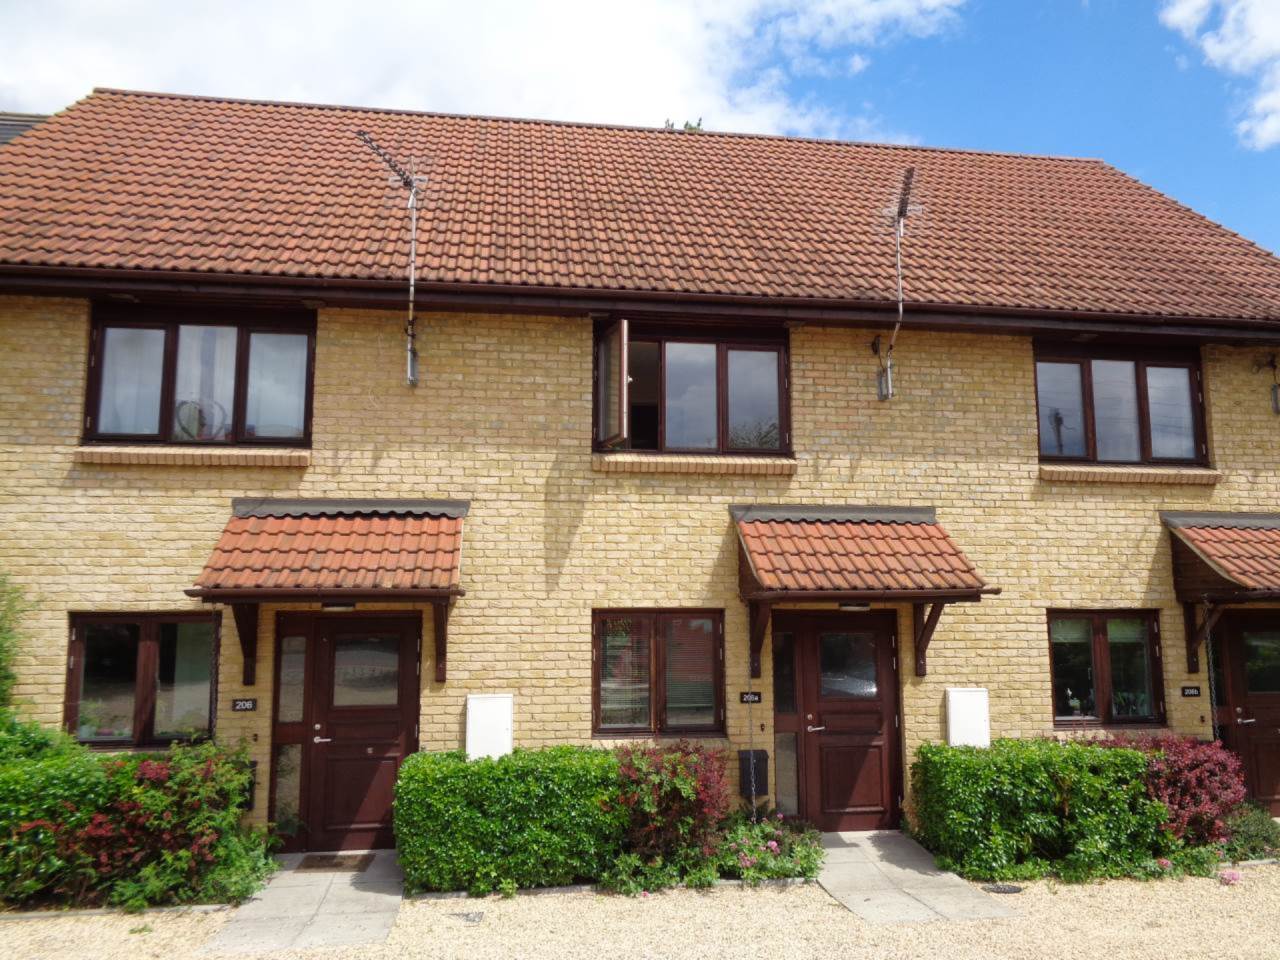 3 bed House (unspecified) for rent in Fen Ditton. From Lets Rent Cambridge